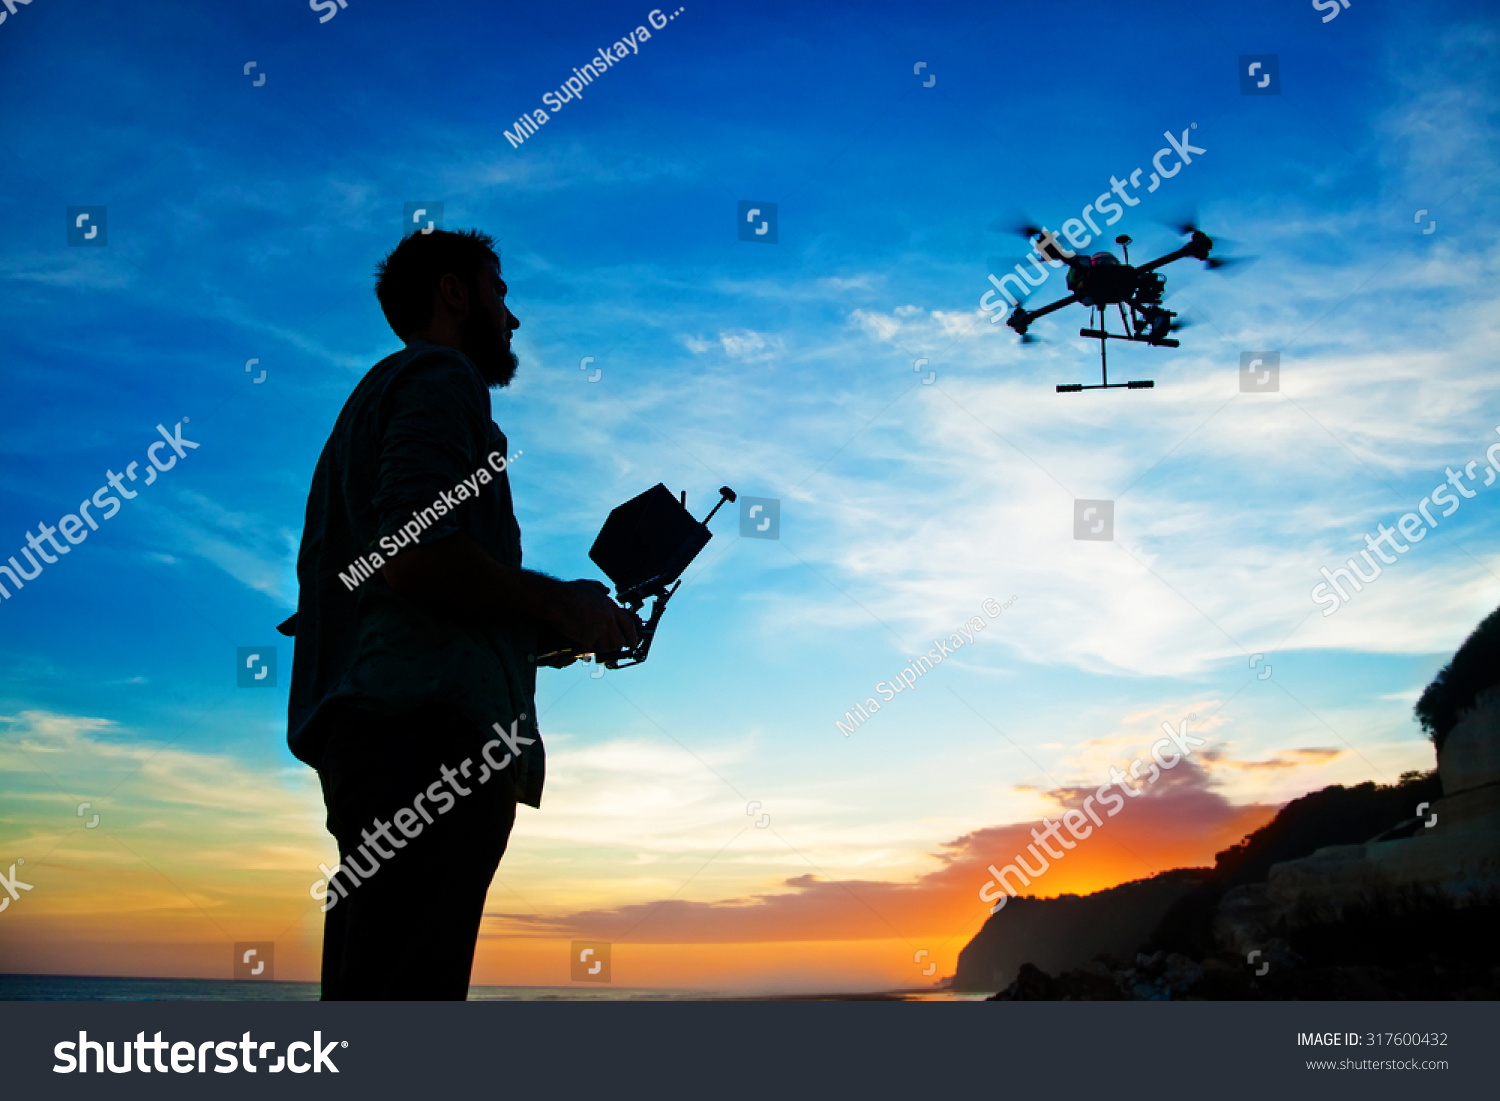 man playing with the drone. silhouette against the sunset sky #317600432